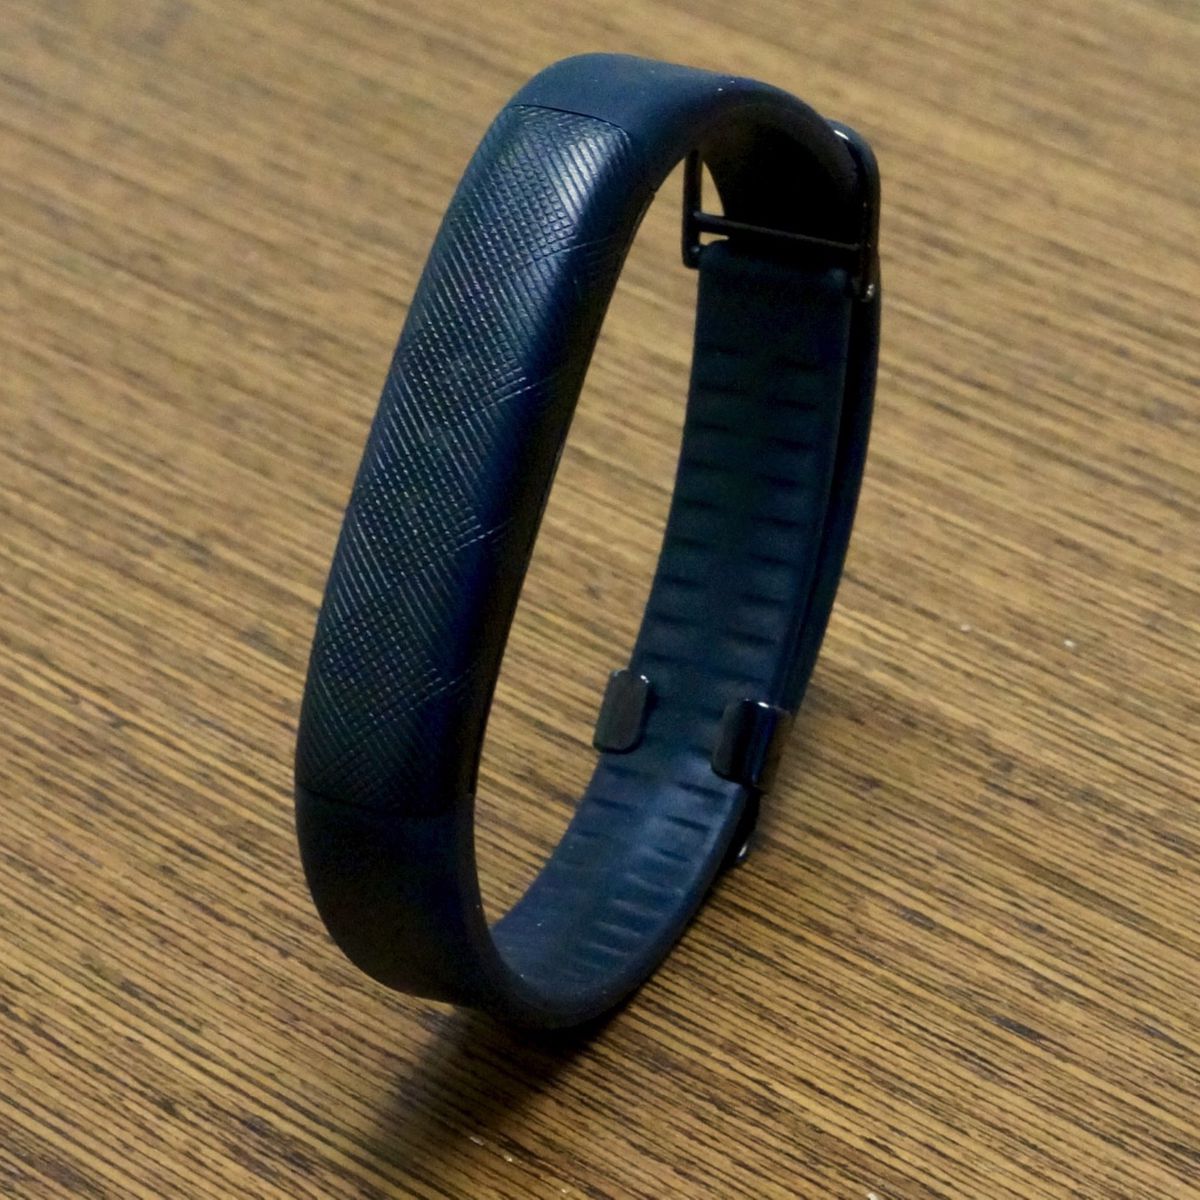 Jawbone Up2 Review - The Verge